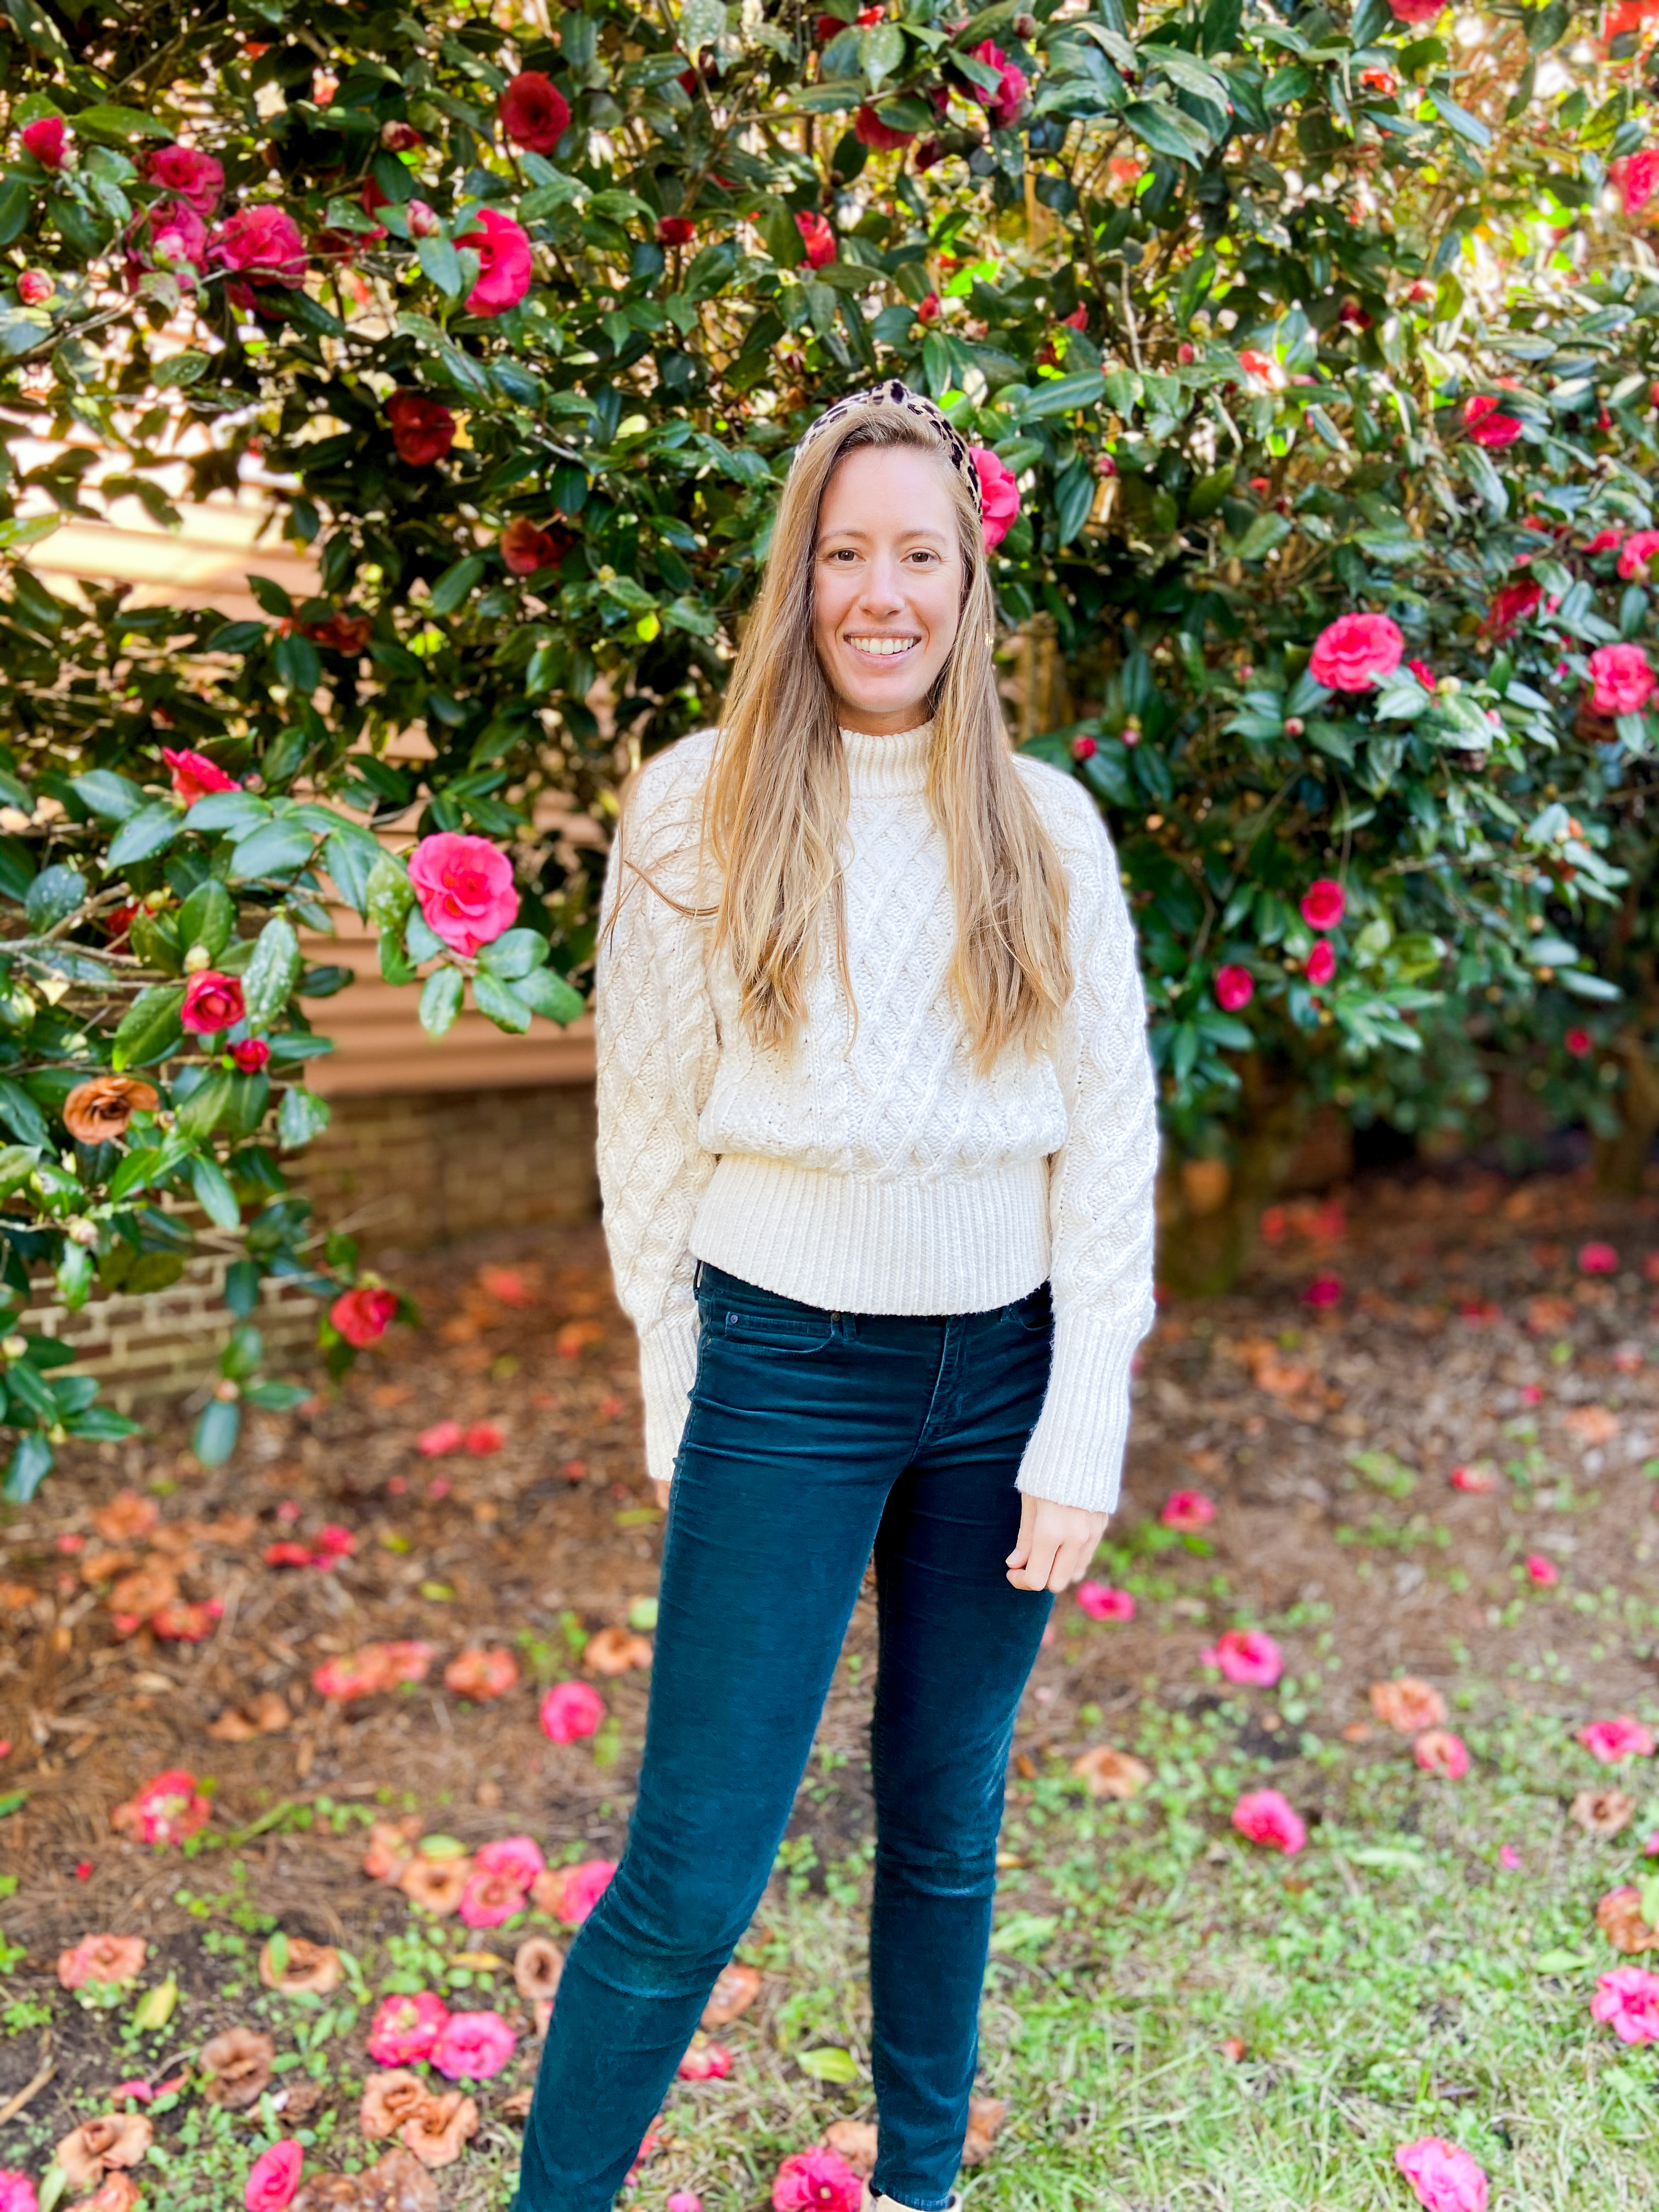 Tallahassee Travel Guide / Winter Outfit Idea / Sustainable Fashion / Sustainable Style / What to Wear in the Winter / What to Wear with Ankle Boots / How to Wear Skinny Jeans / Cable Knit Sweater / Affordable Sweaters